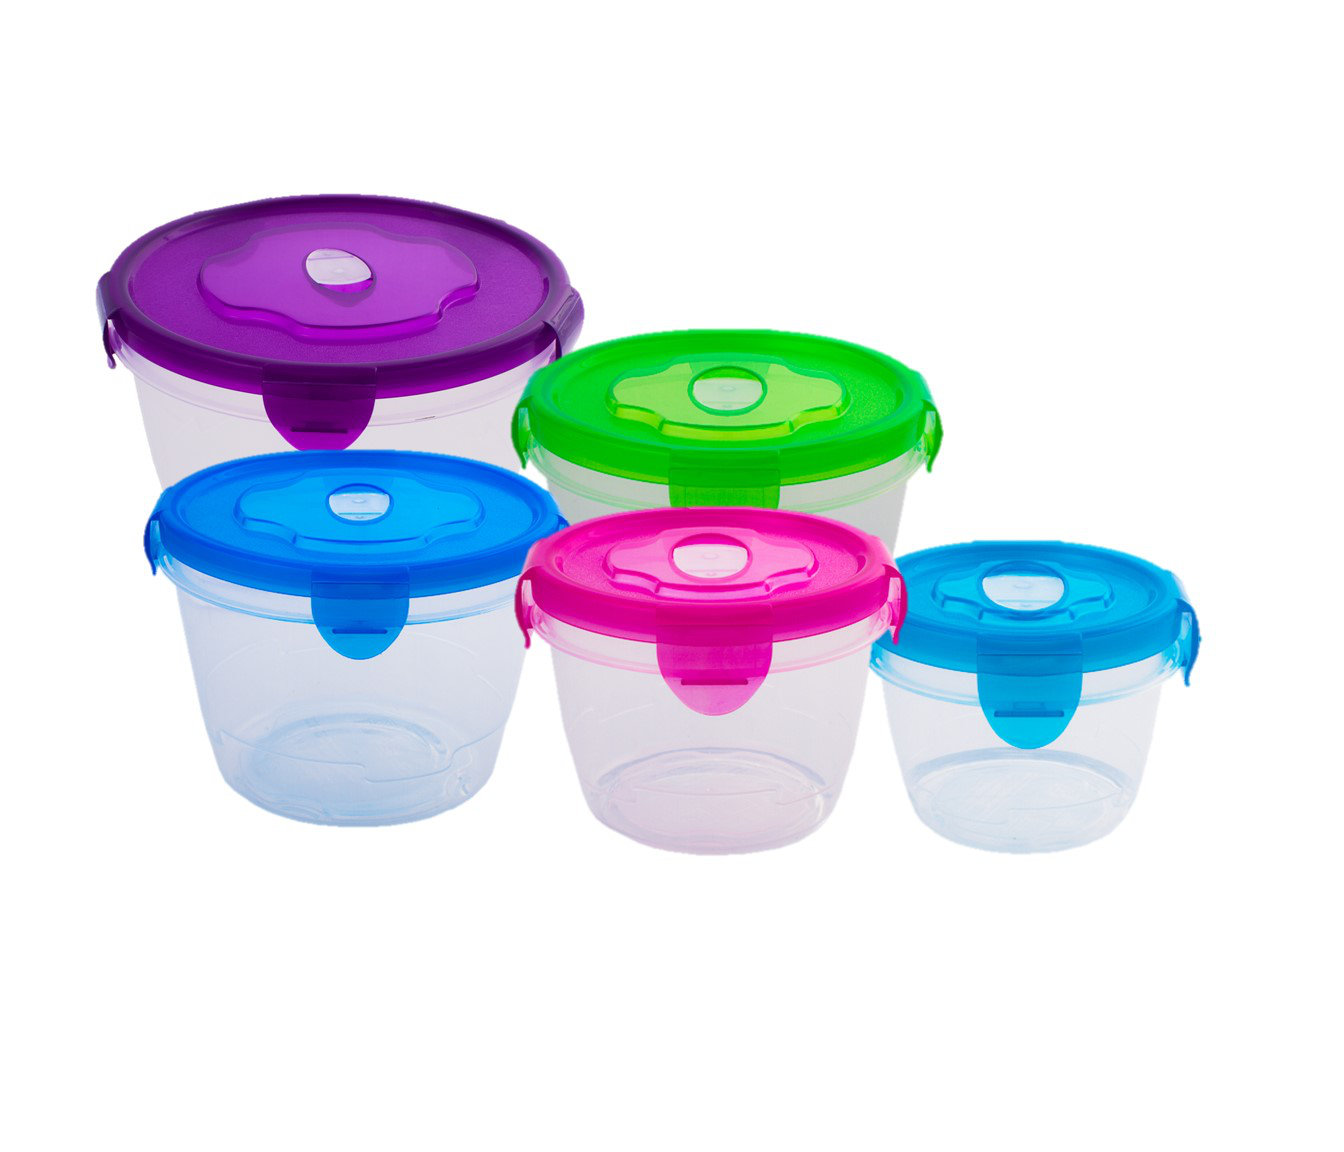 5 PCS Large Fruit Containers for Fridge - Leakproof Food Storage